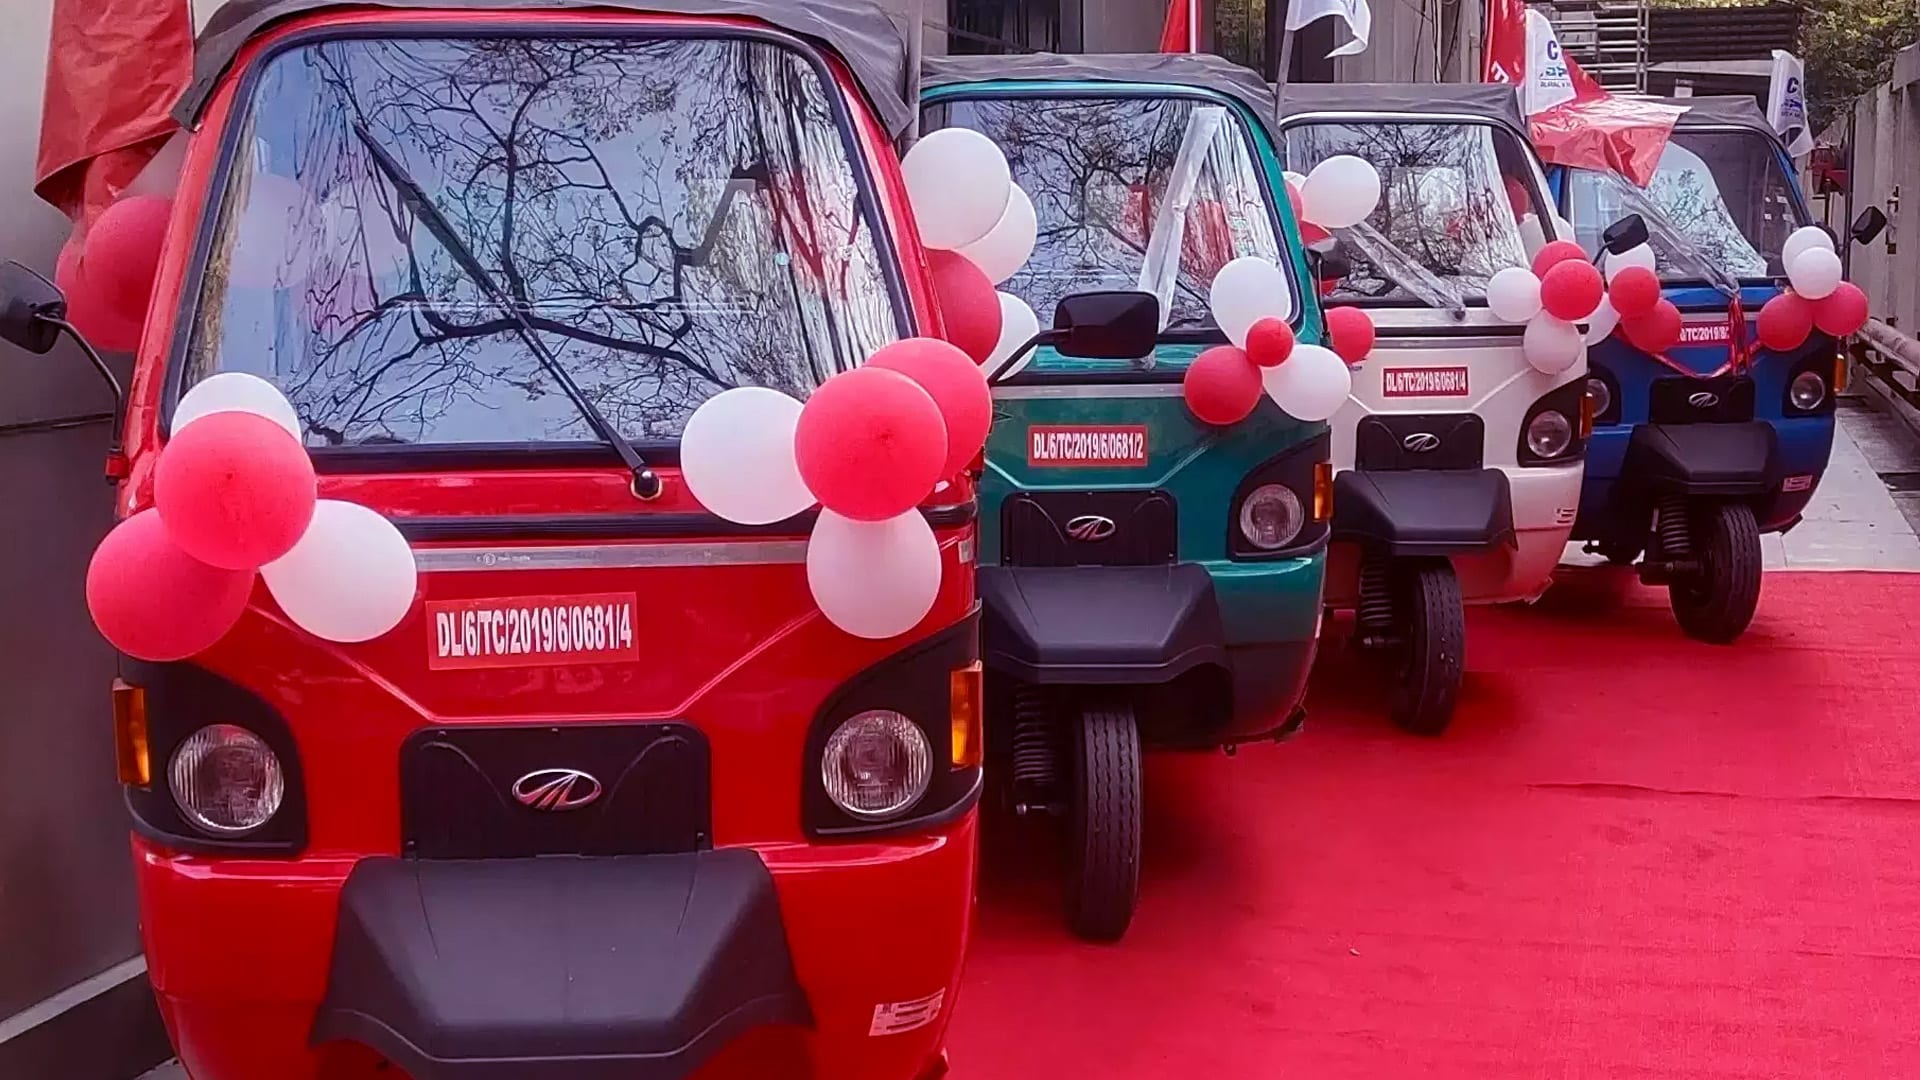 Mahindra Electric ties up with CSC to promote EV adoption in rural India